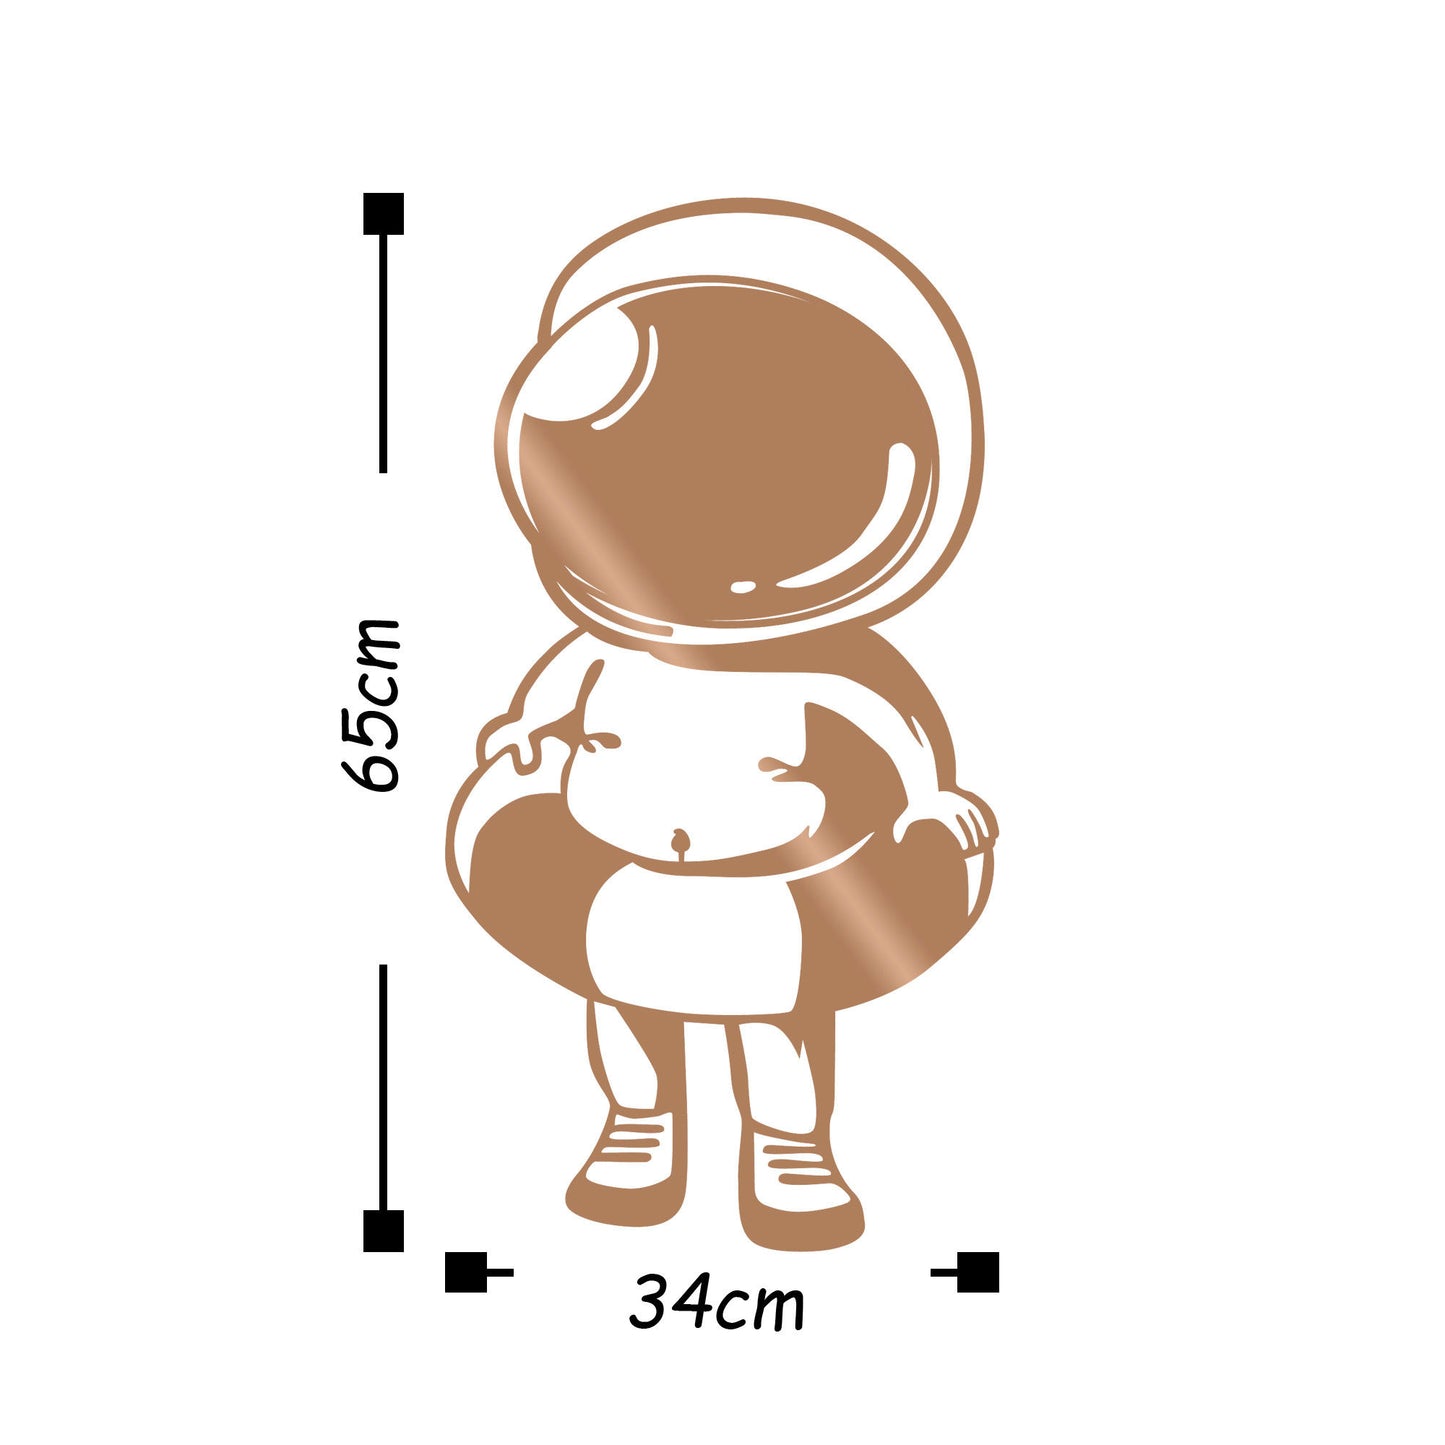 Baby Astronaut - Copper - Decorative Metal Wall Accessory